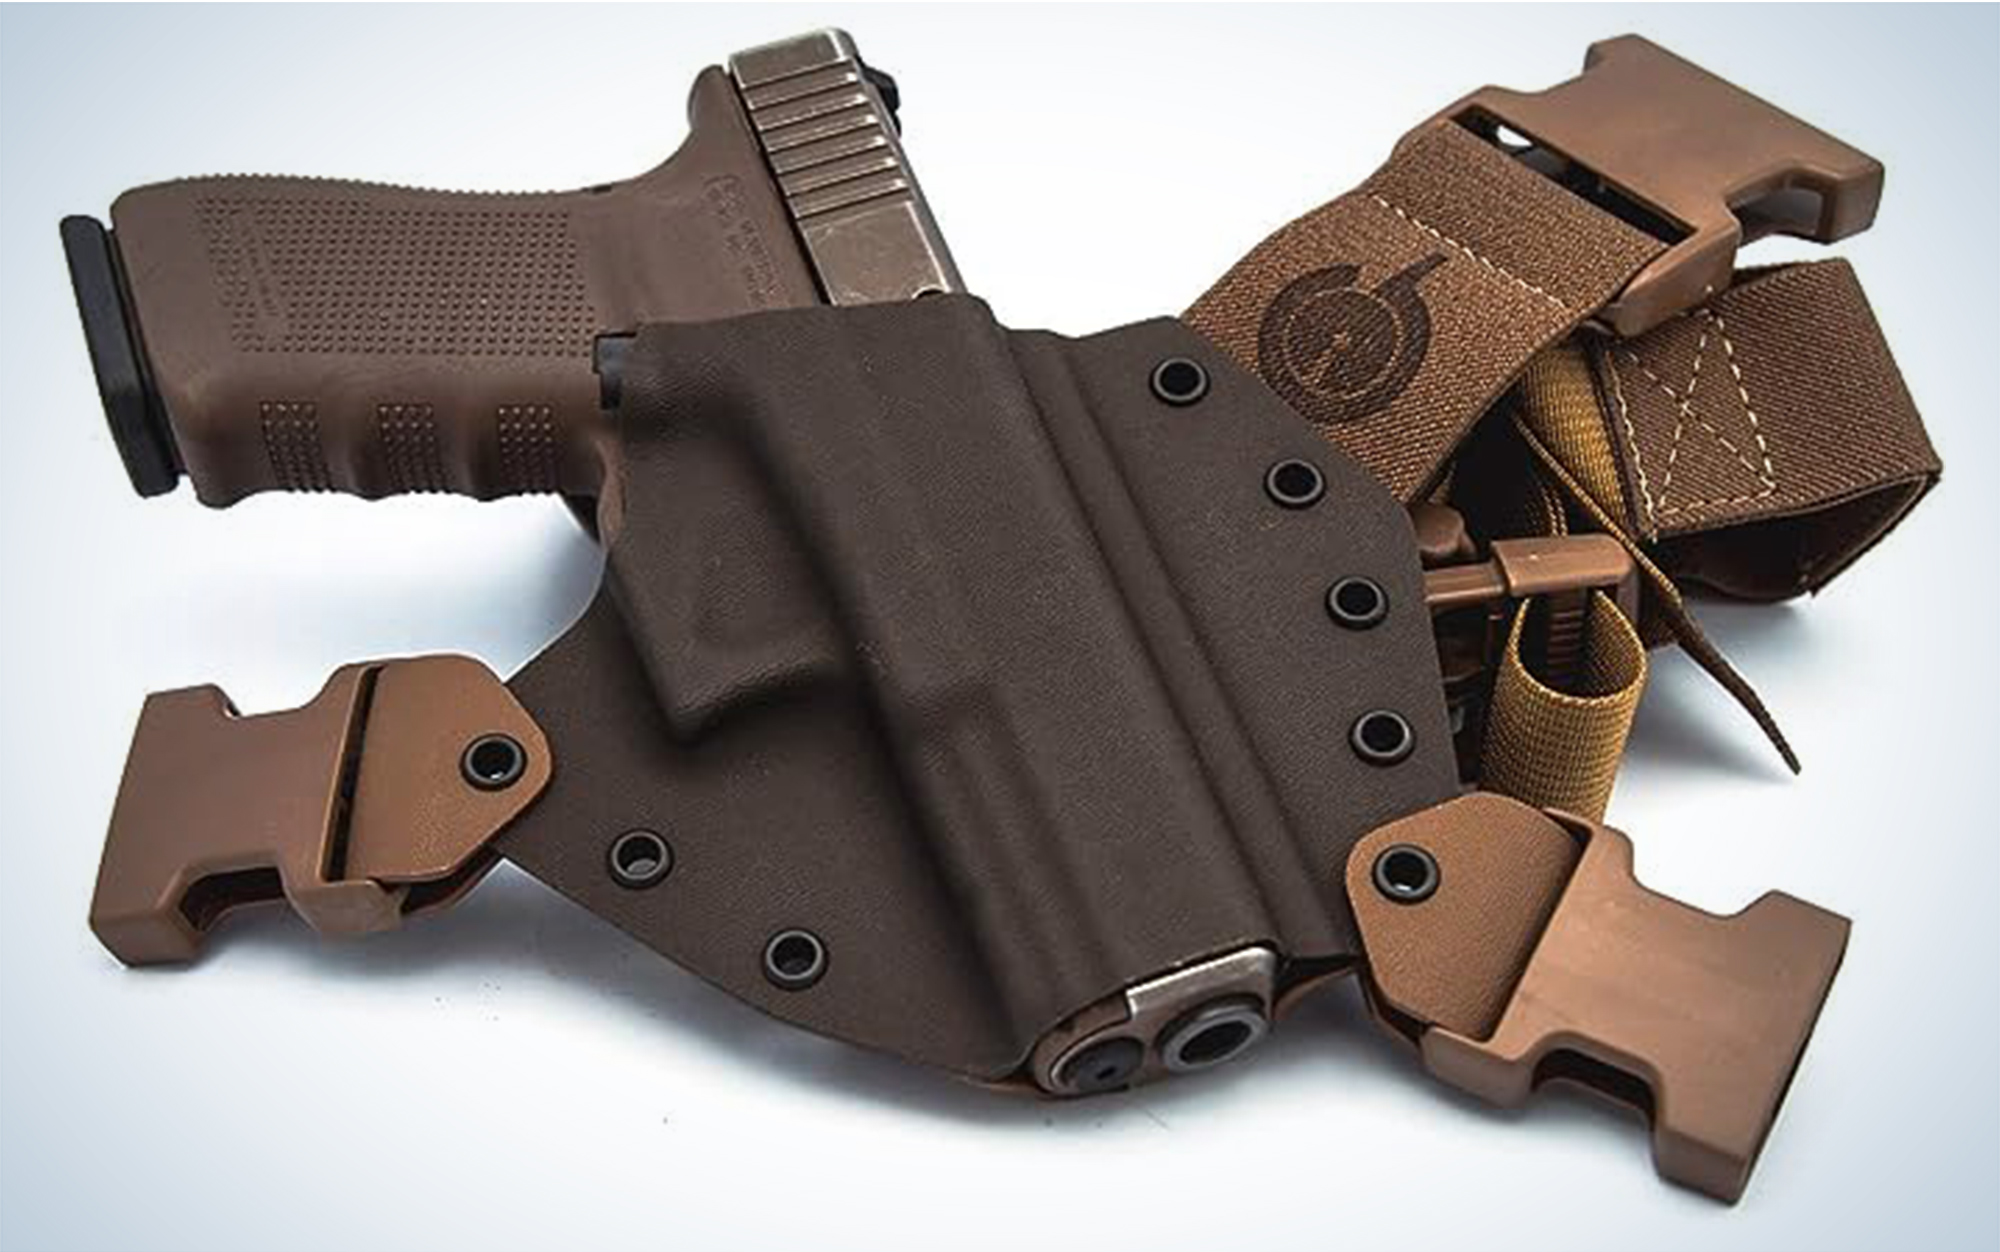 We tested the Gunfighters Inc. Kenai Chest Holster.